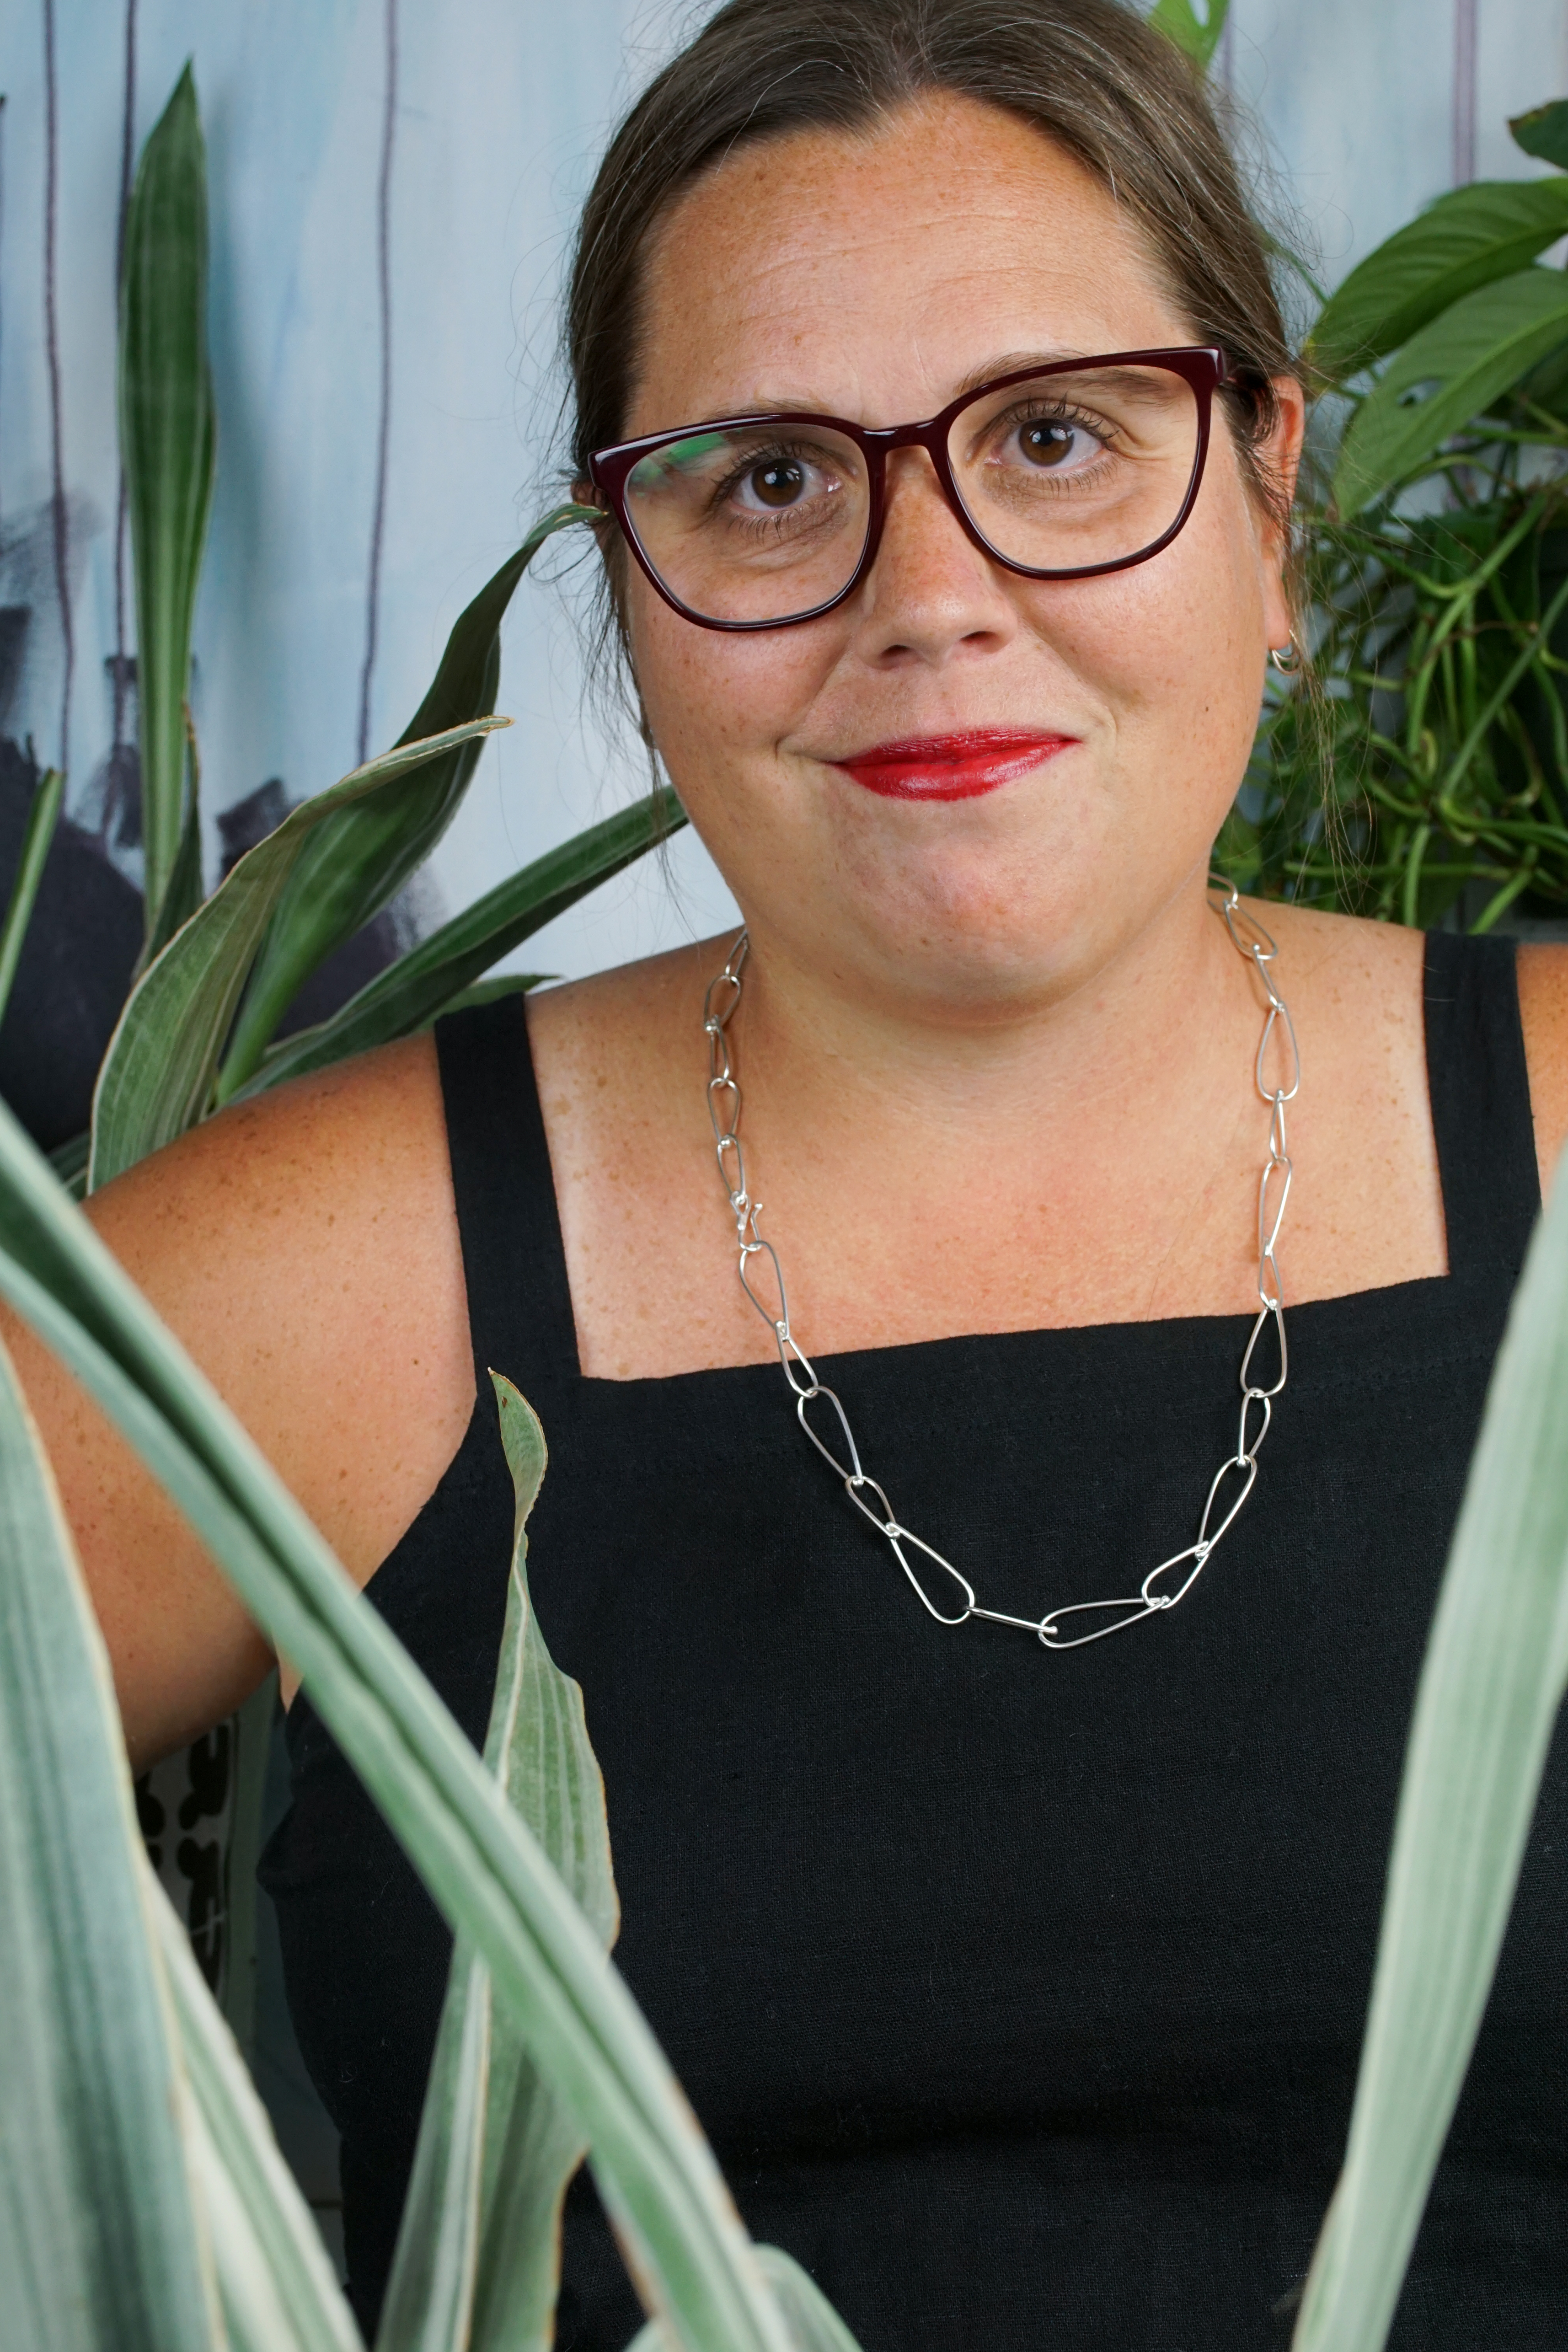 french librarian vibes: woman wearing black jumpsuit, silver chain necklace, glasses and red lipstick posing with plants